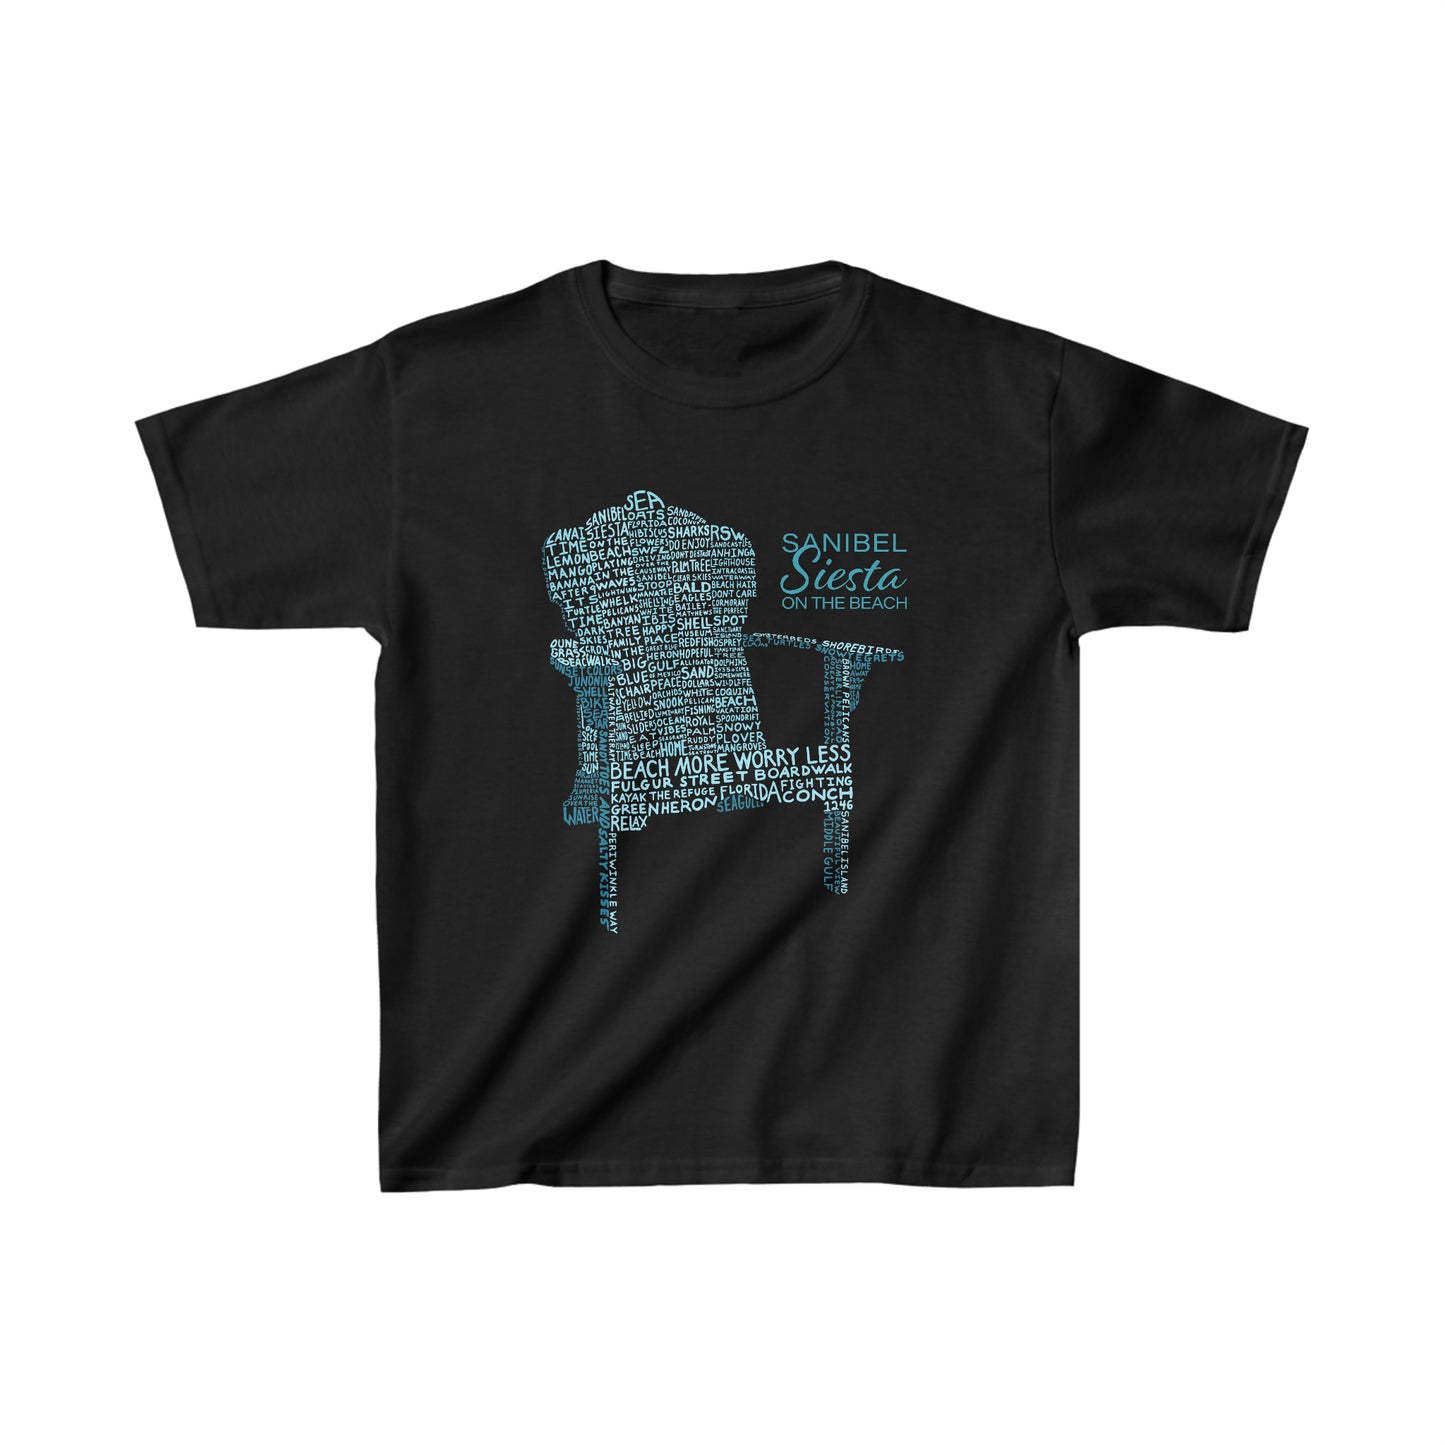 Big Blue Chair Kids Heavy Cotton™ Tee + More Colors